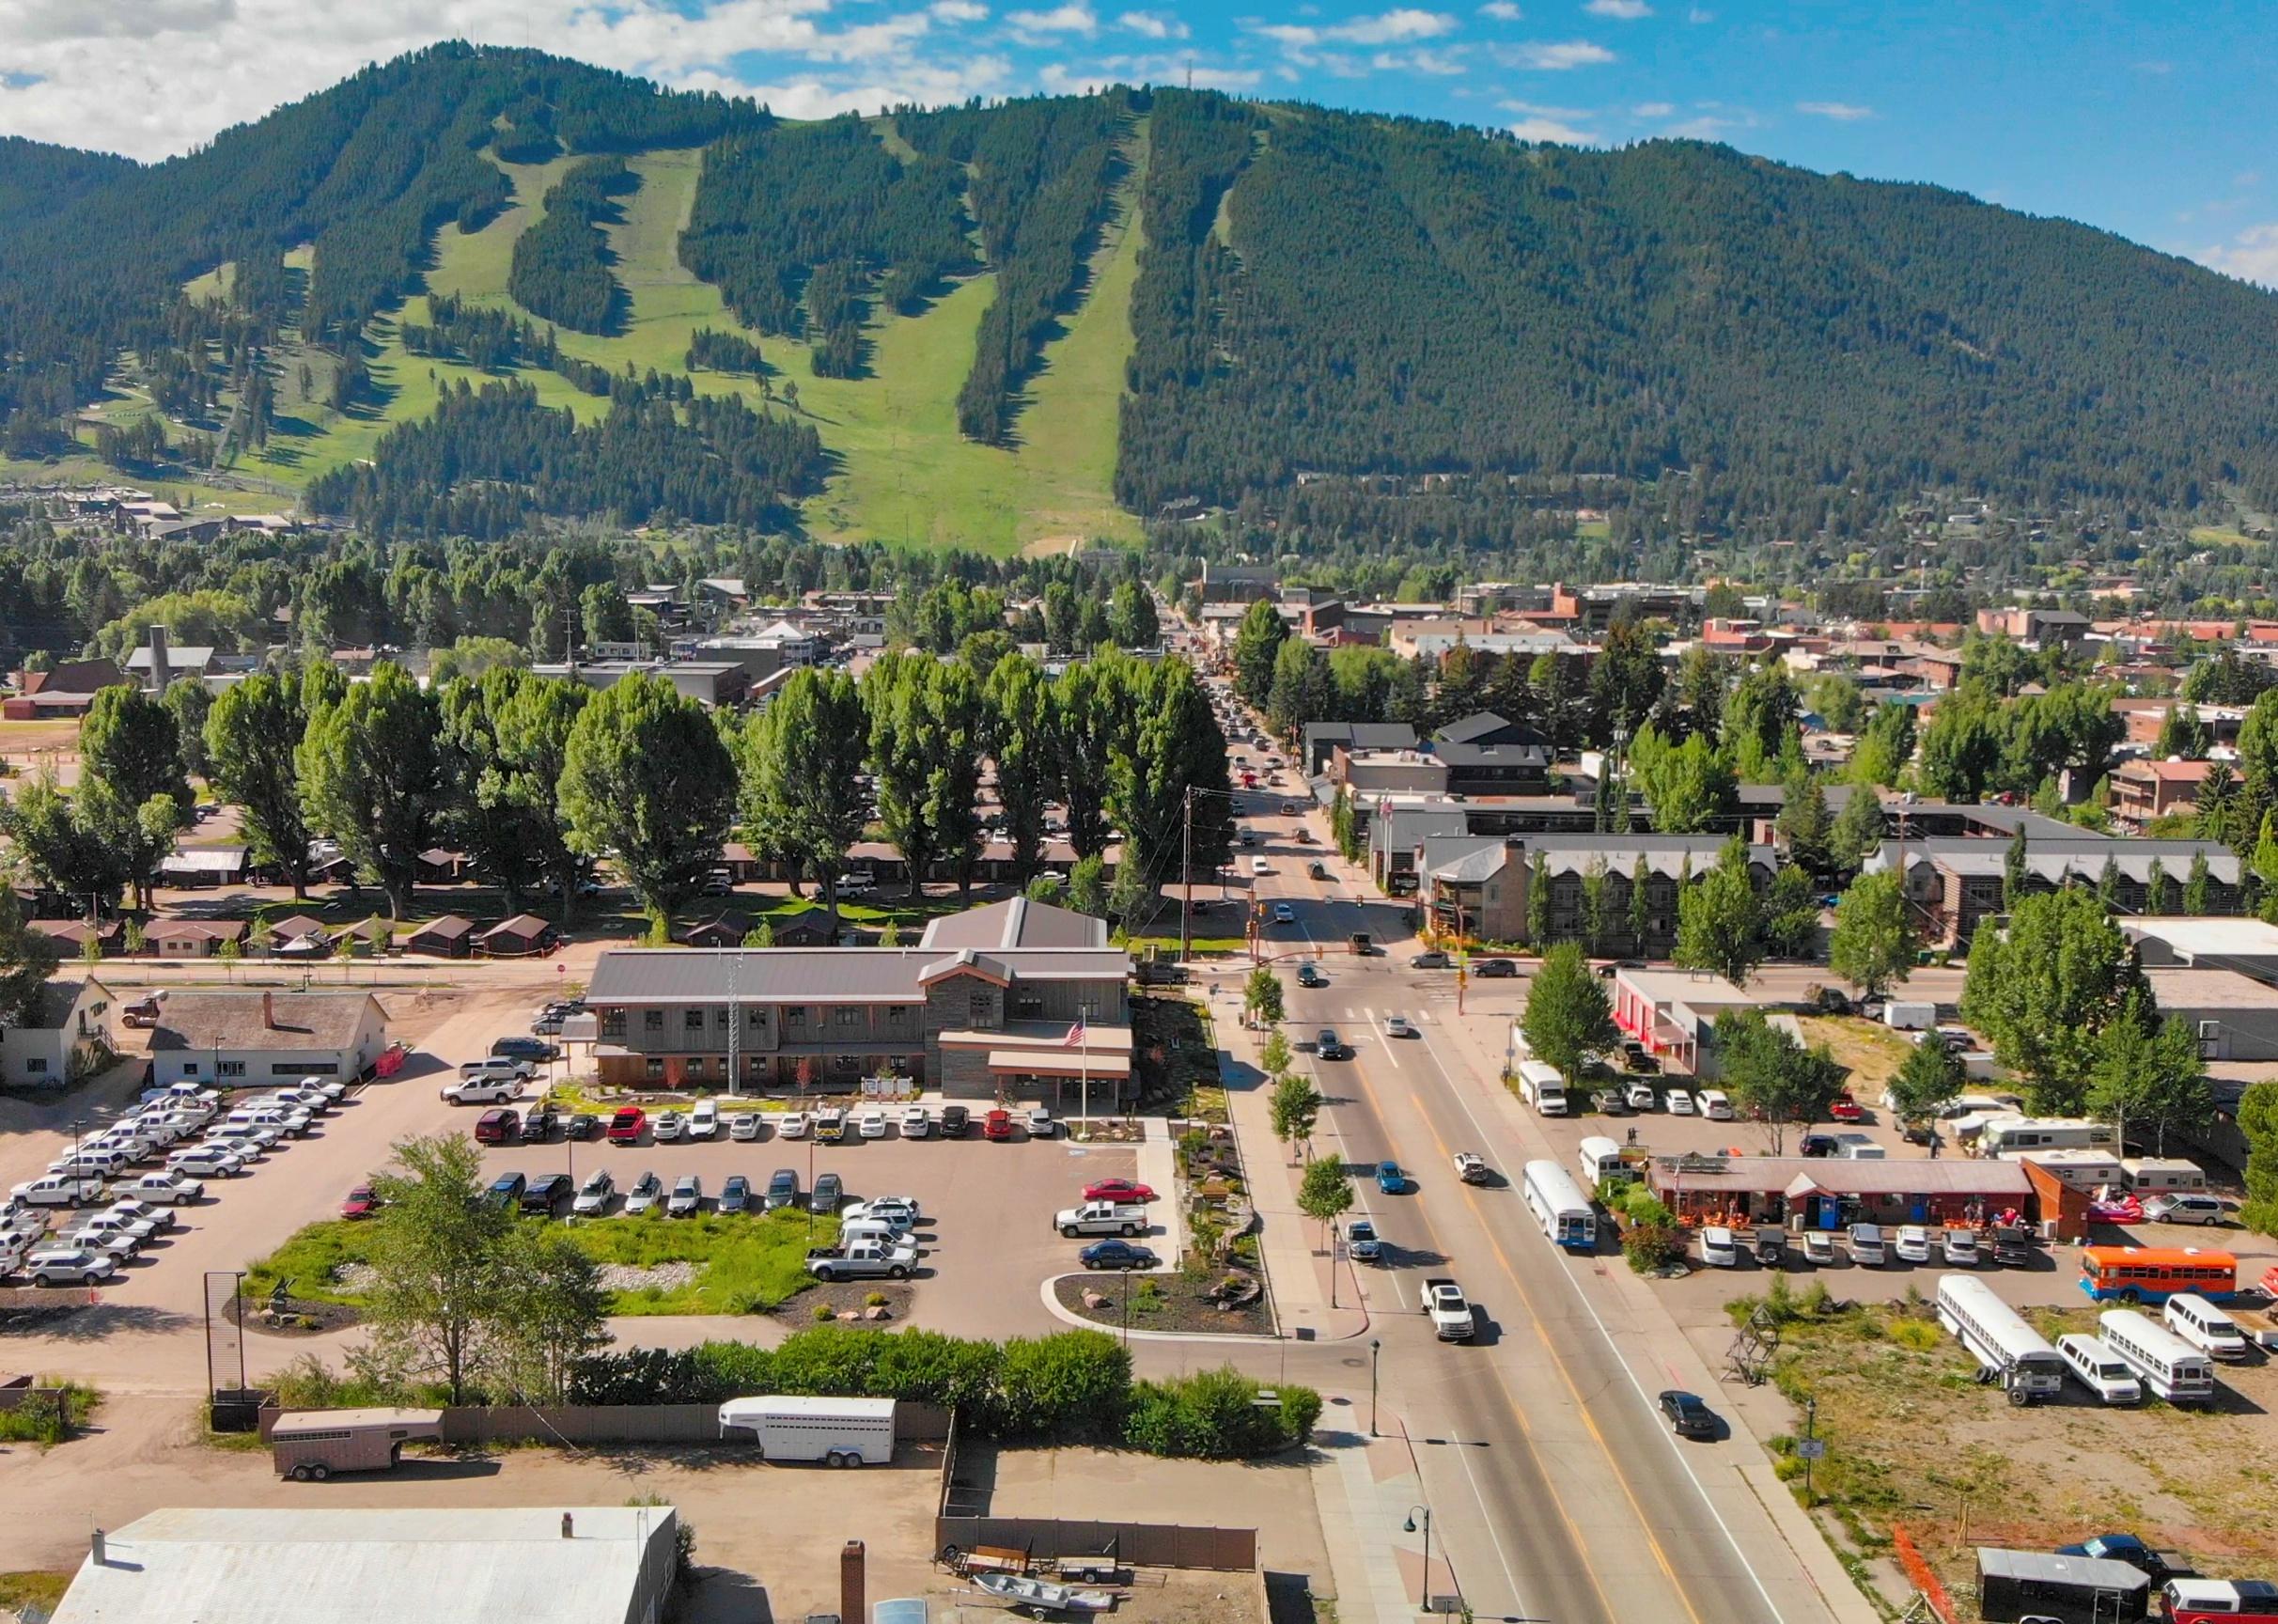 Panoramic aerial view of town and cars in Jackson Hole.